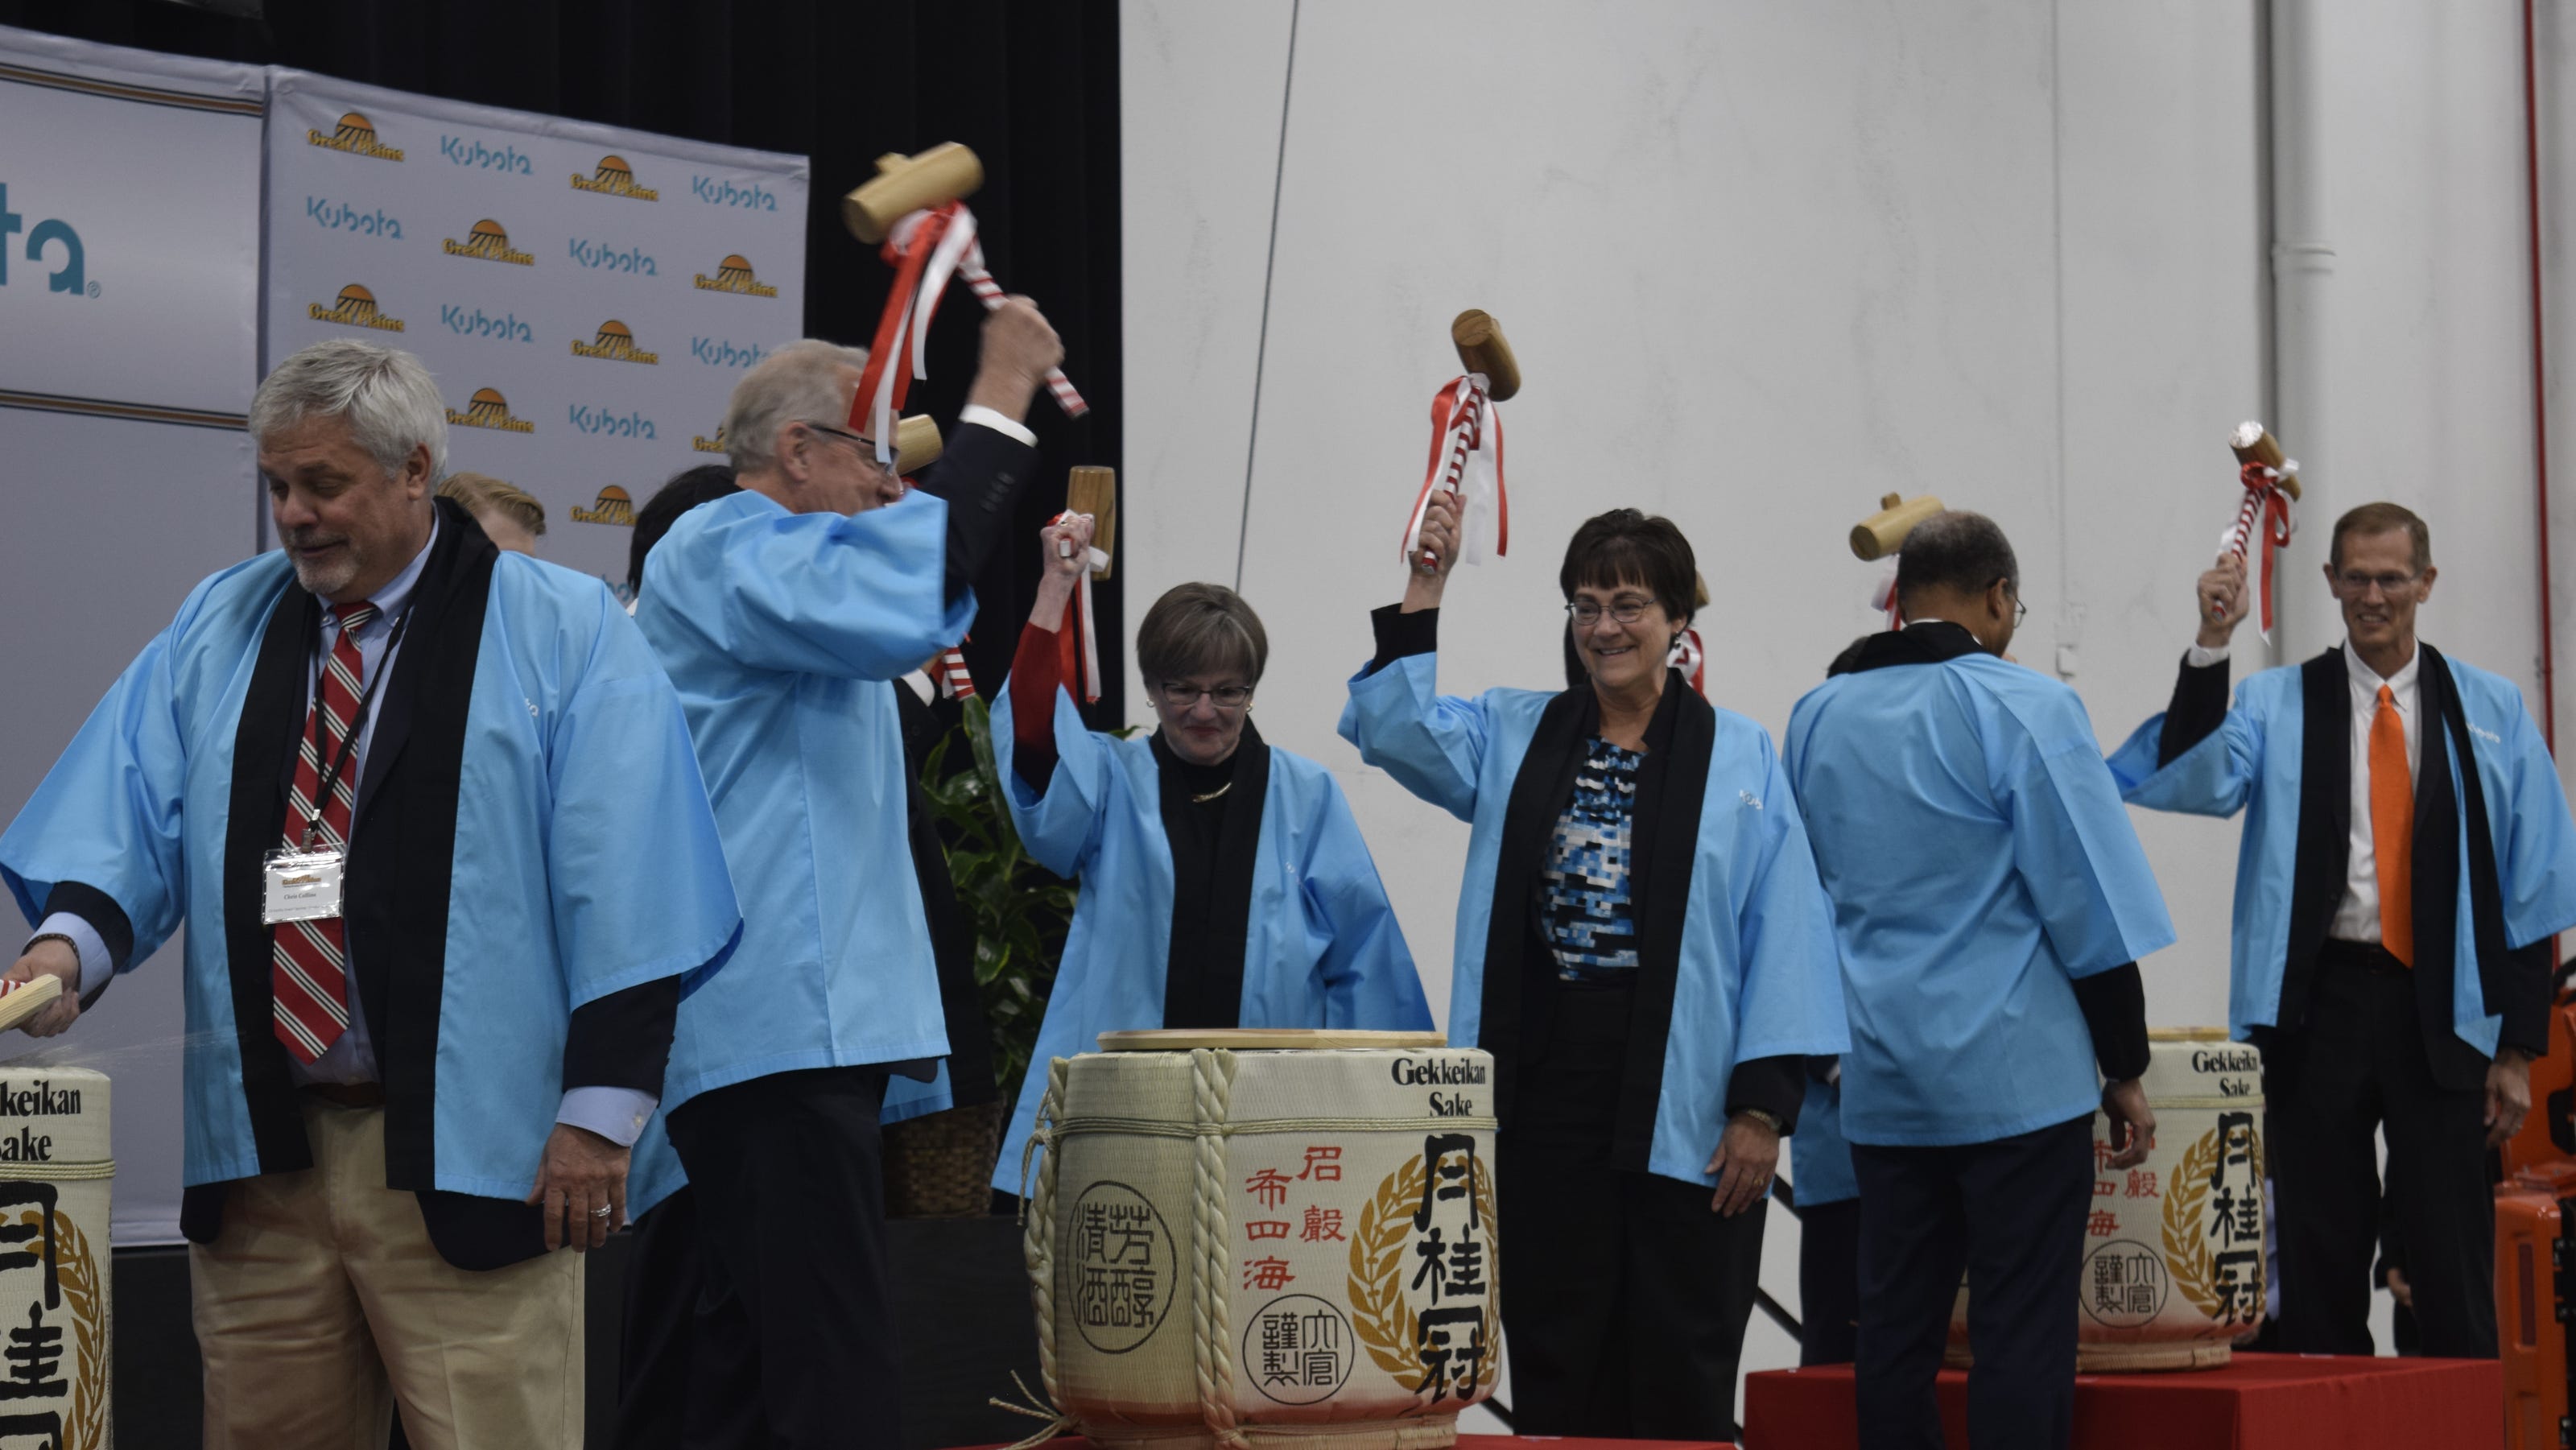 Japanese tradition included in grand opening of facility in Salina